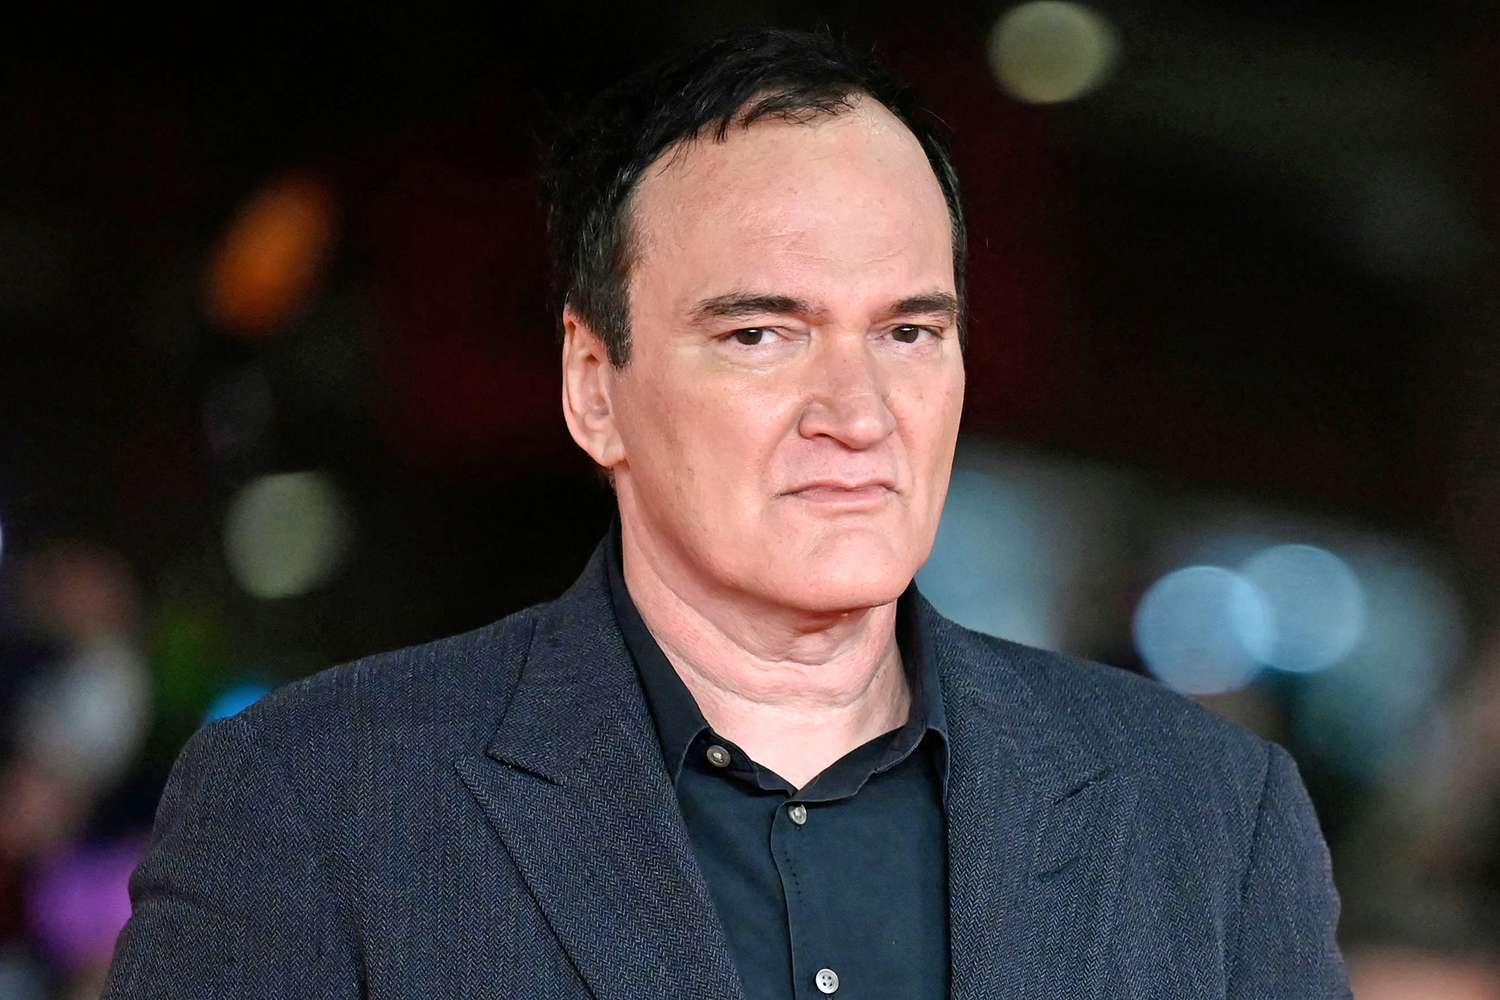 Quentin Tarantino blasts streaming movies: ‘It’s almost like they don’t exist’